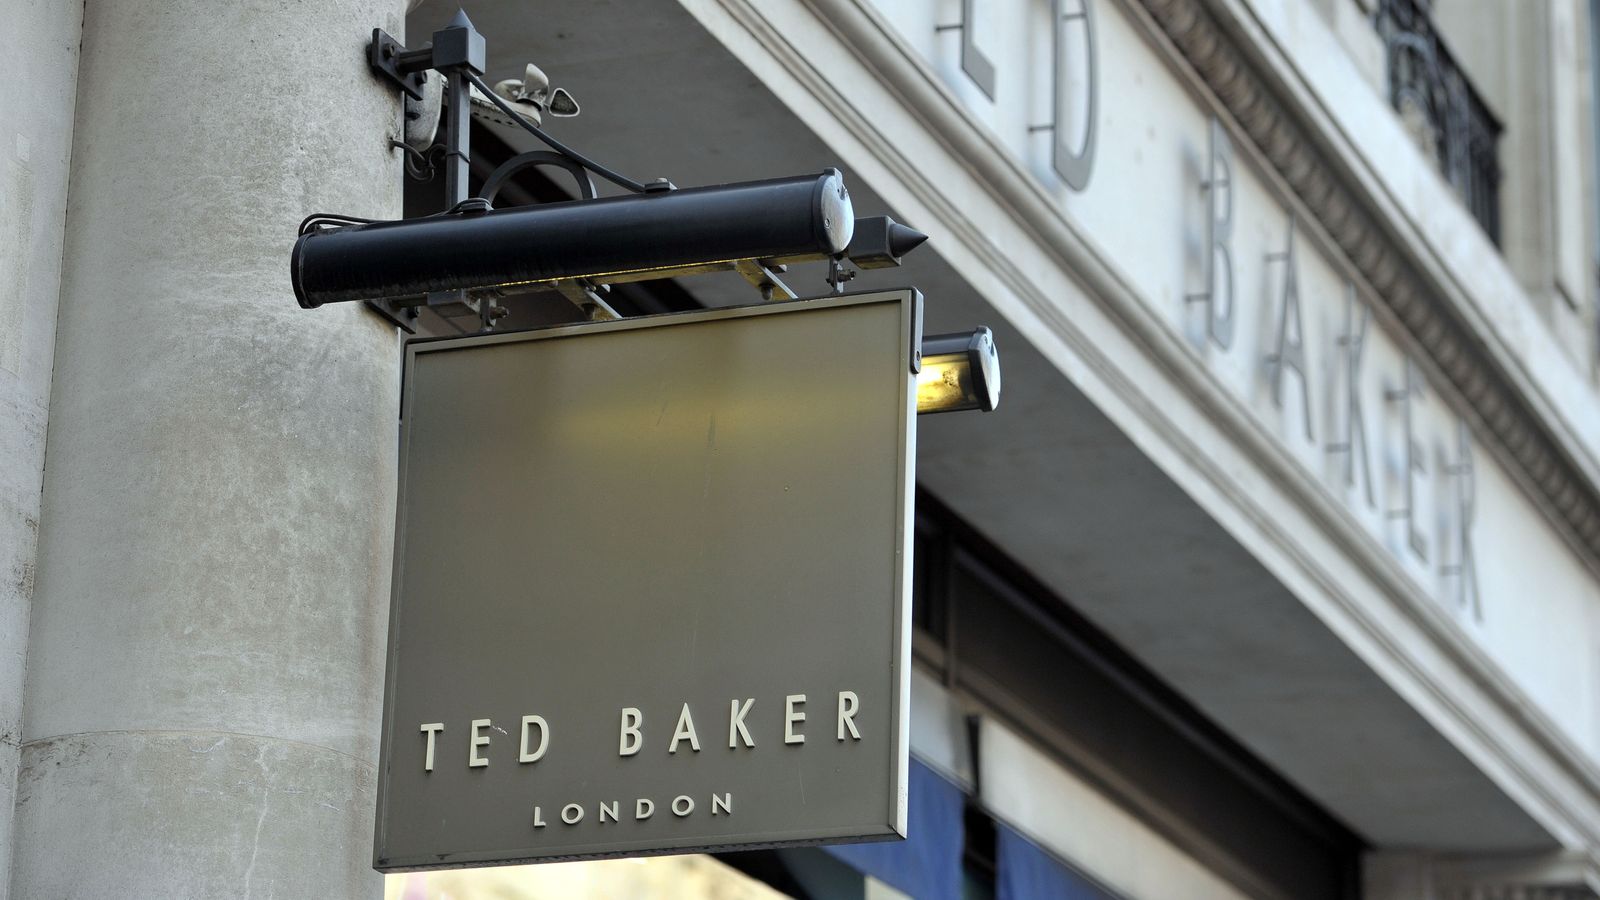 Ted Baker Agrees Takeover By US Reebok Owner Ted Baker The, 52% OFF